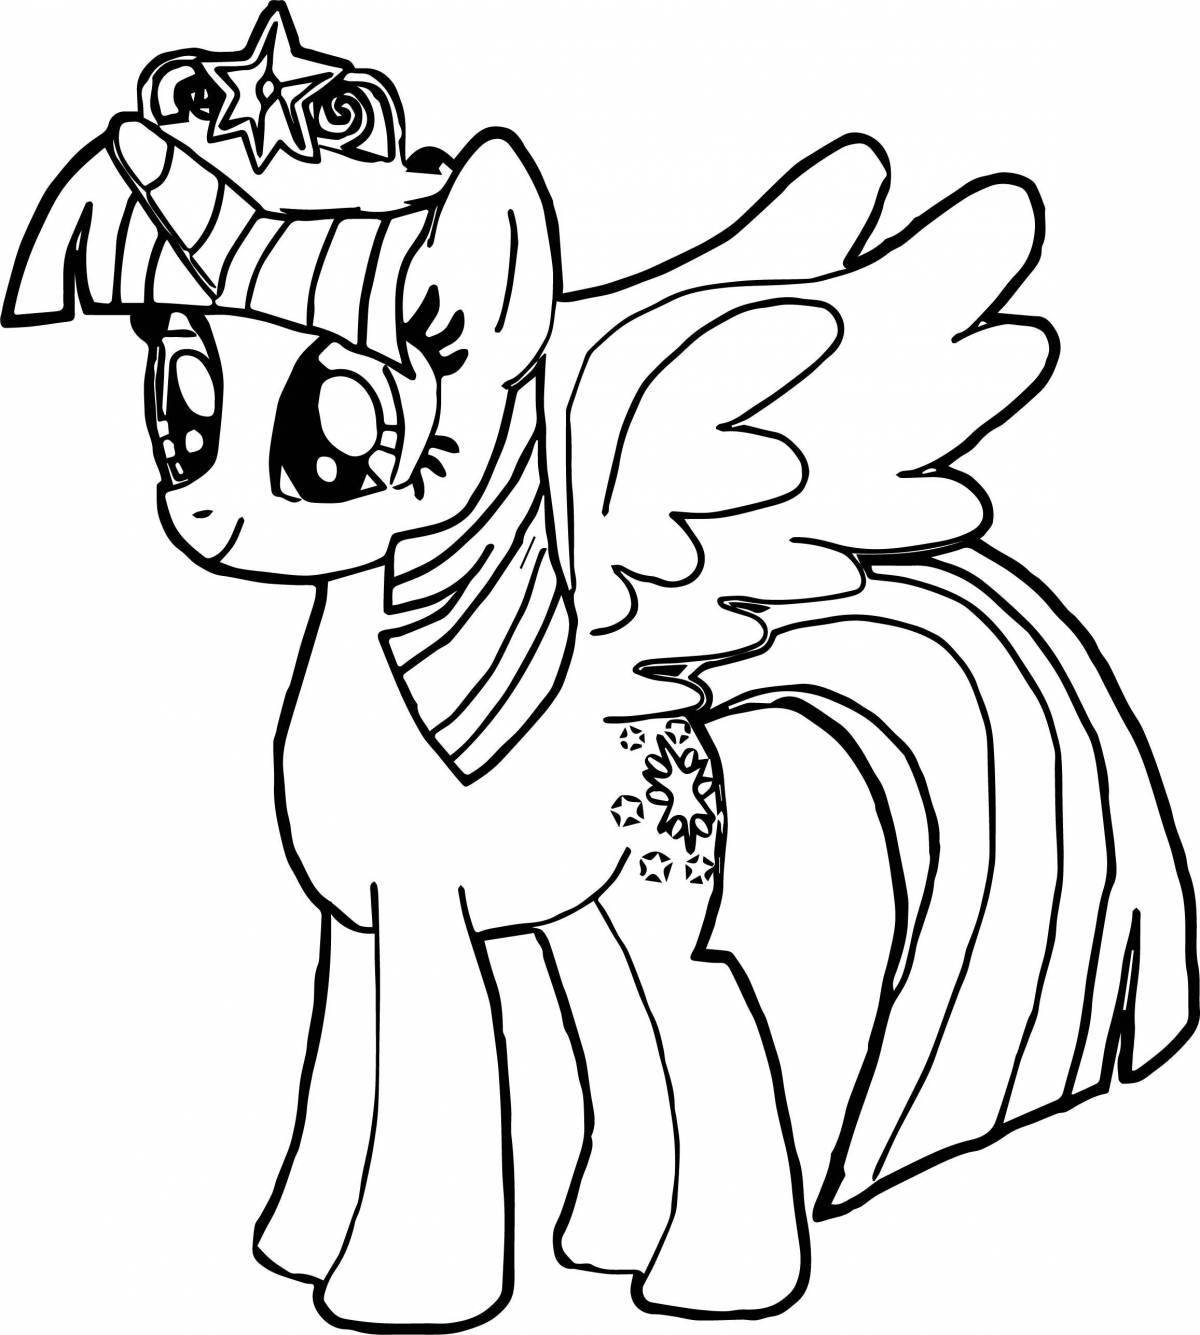 Awesome winged pony coloring book